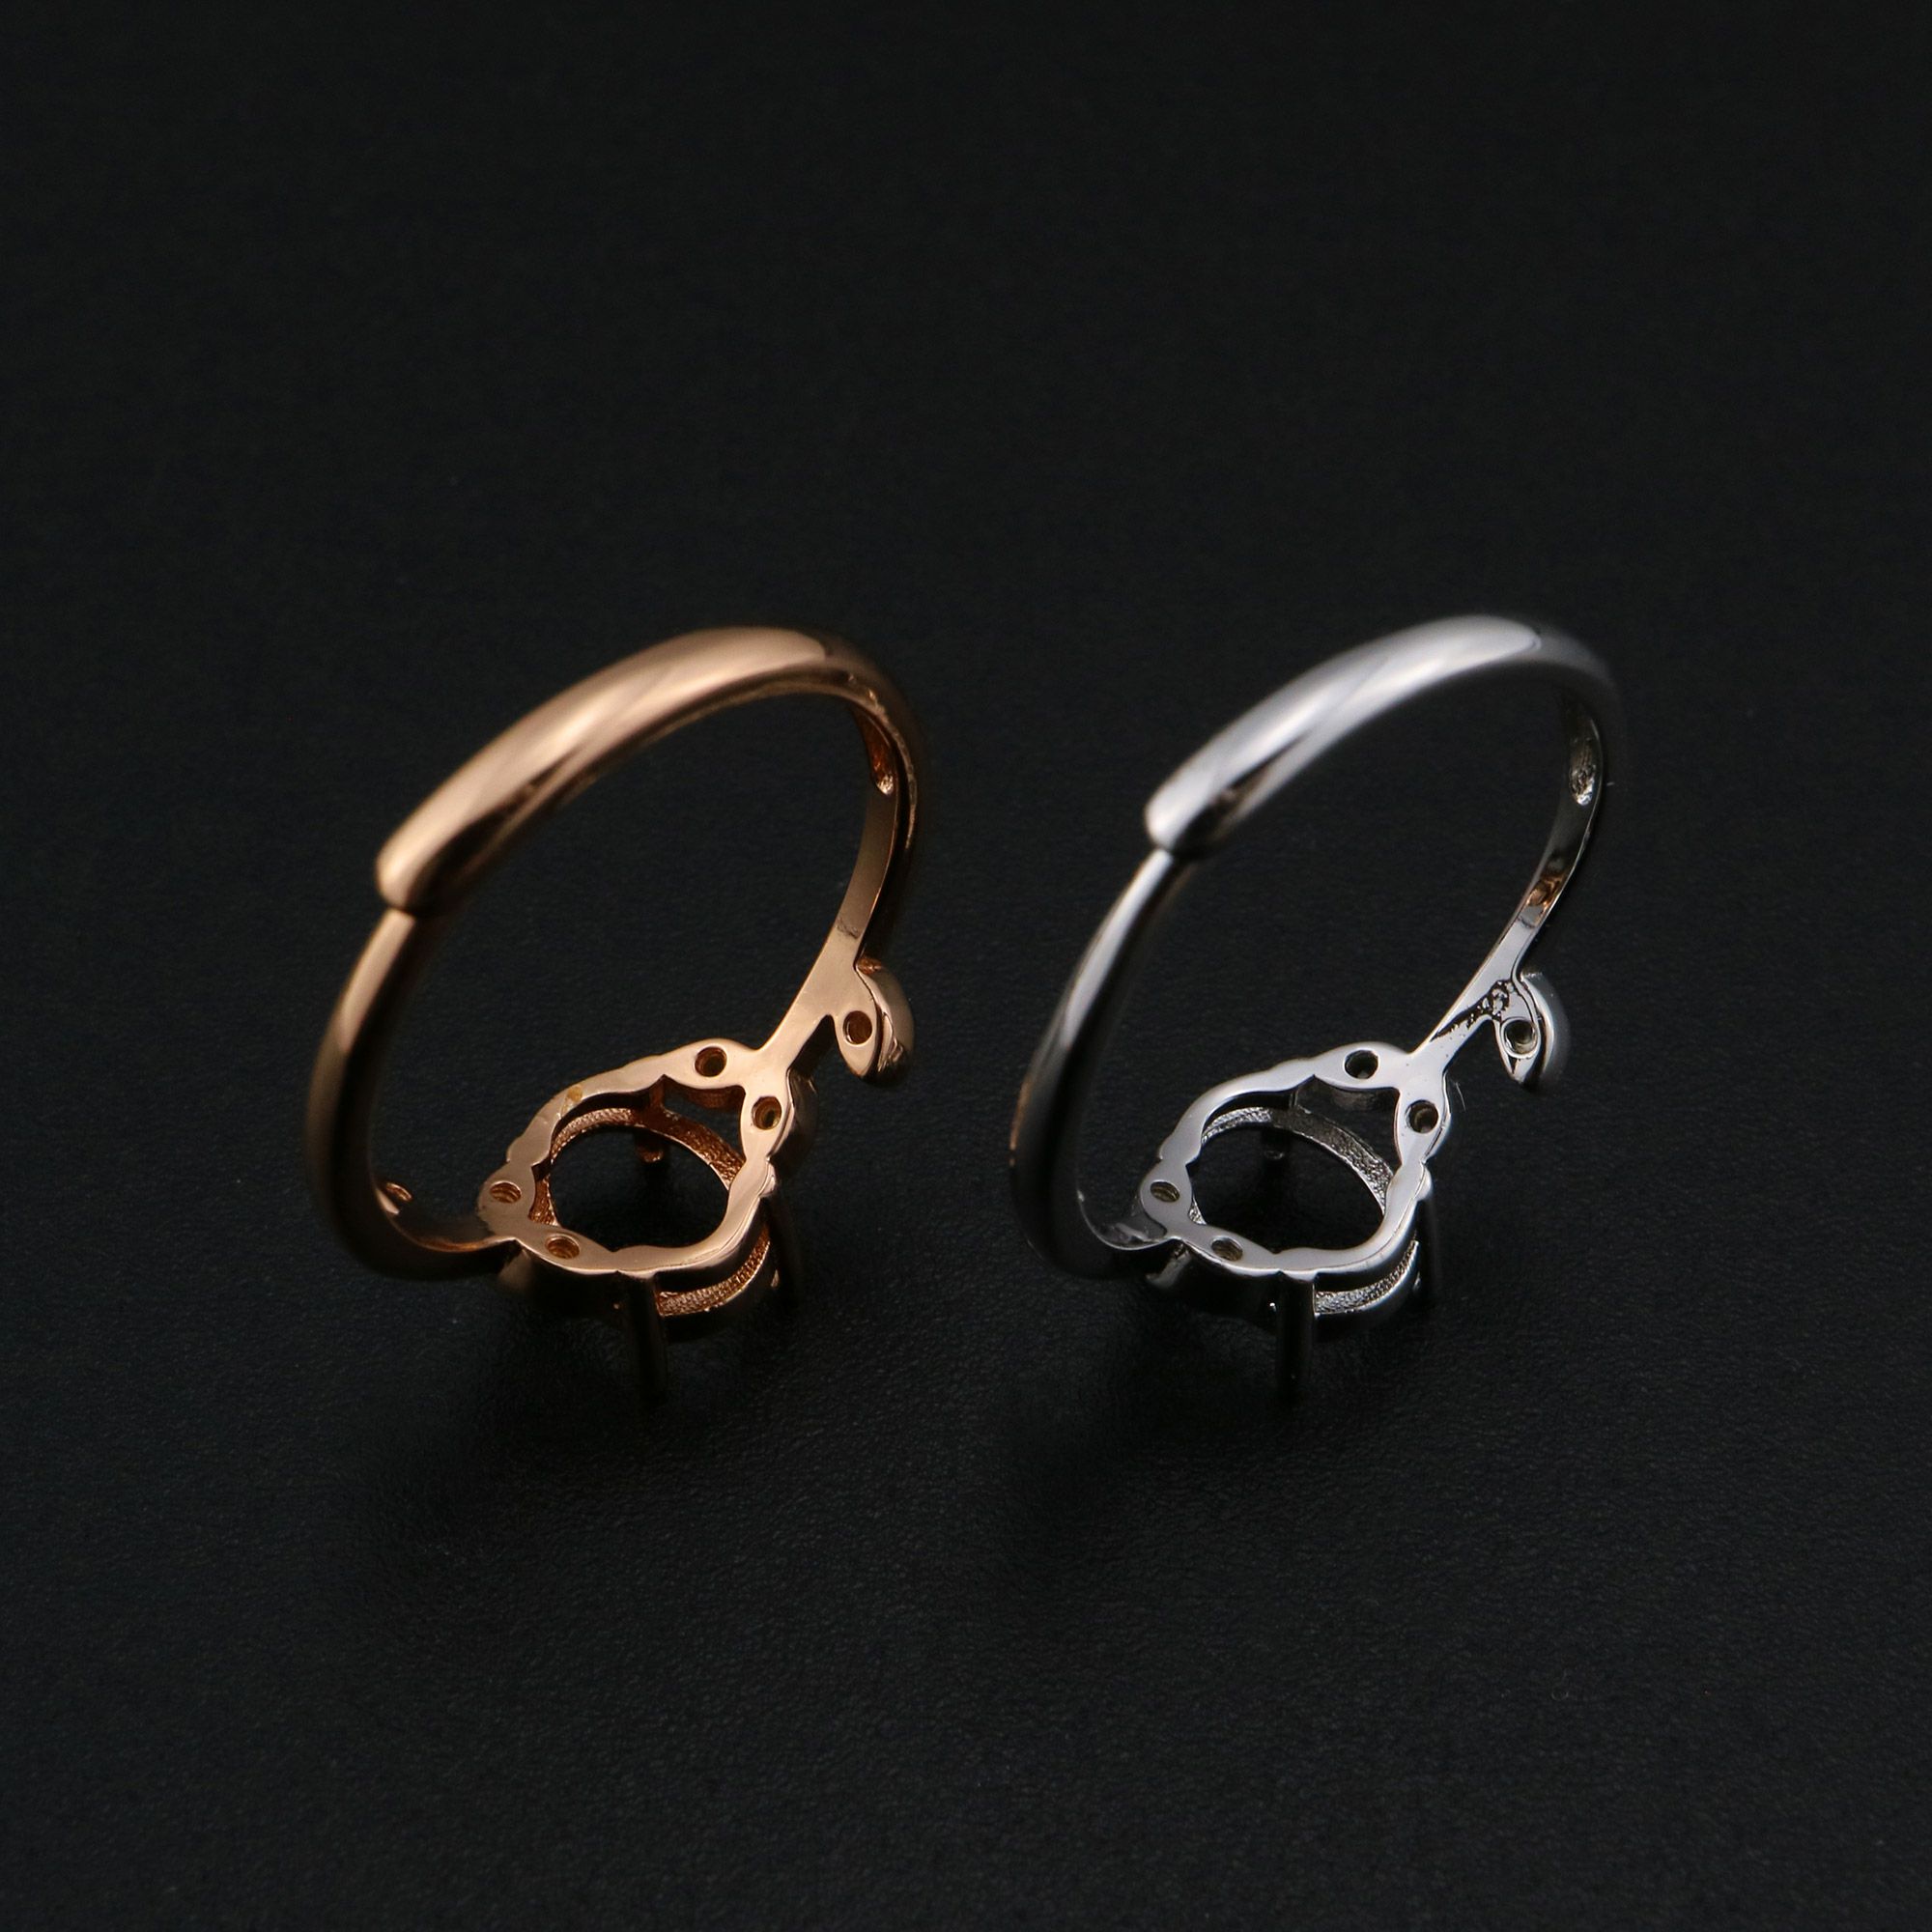 6x8MM Oval Prong Ring Settings Solid 925 Silver Rose Gold Plated Flower Branch DIY Adjustable Ring Bezel for Gemstone Supplies 1224091 - Click Image to Close